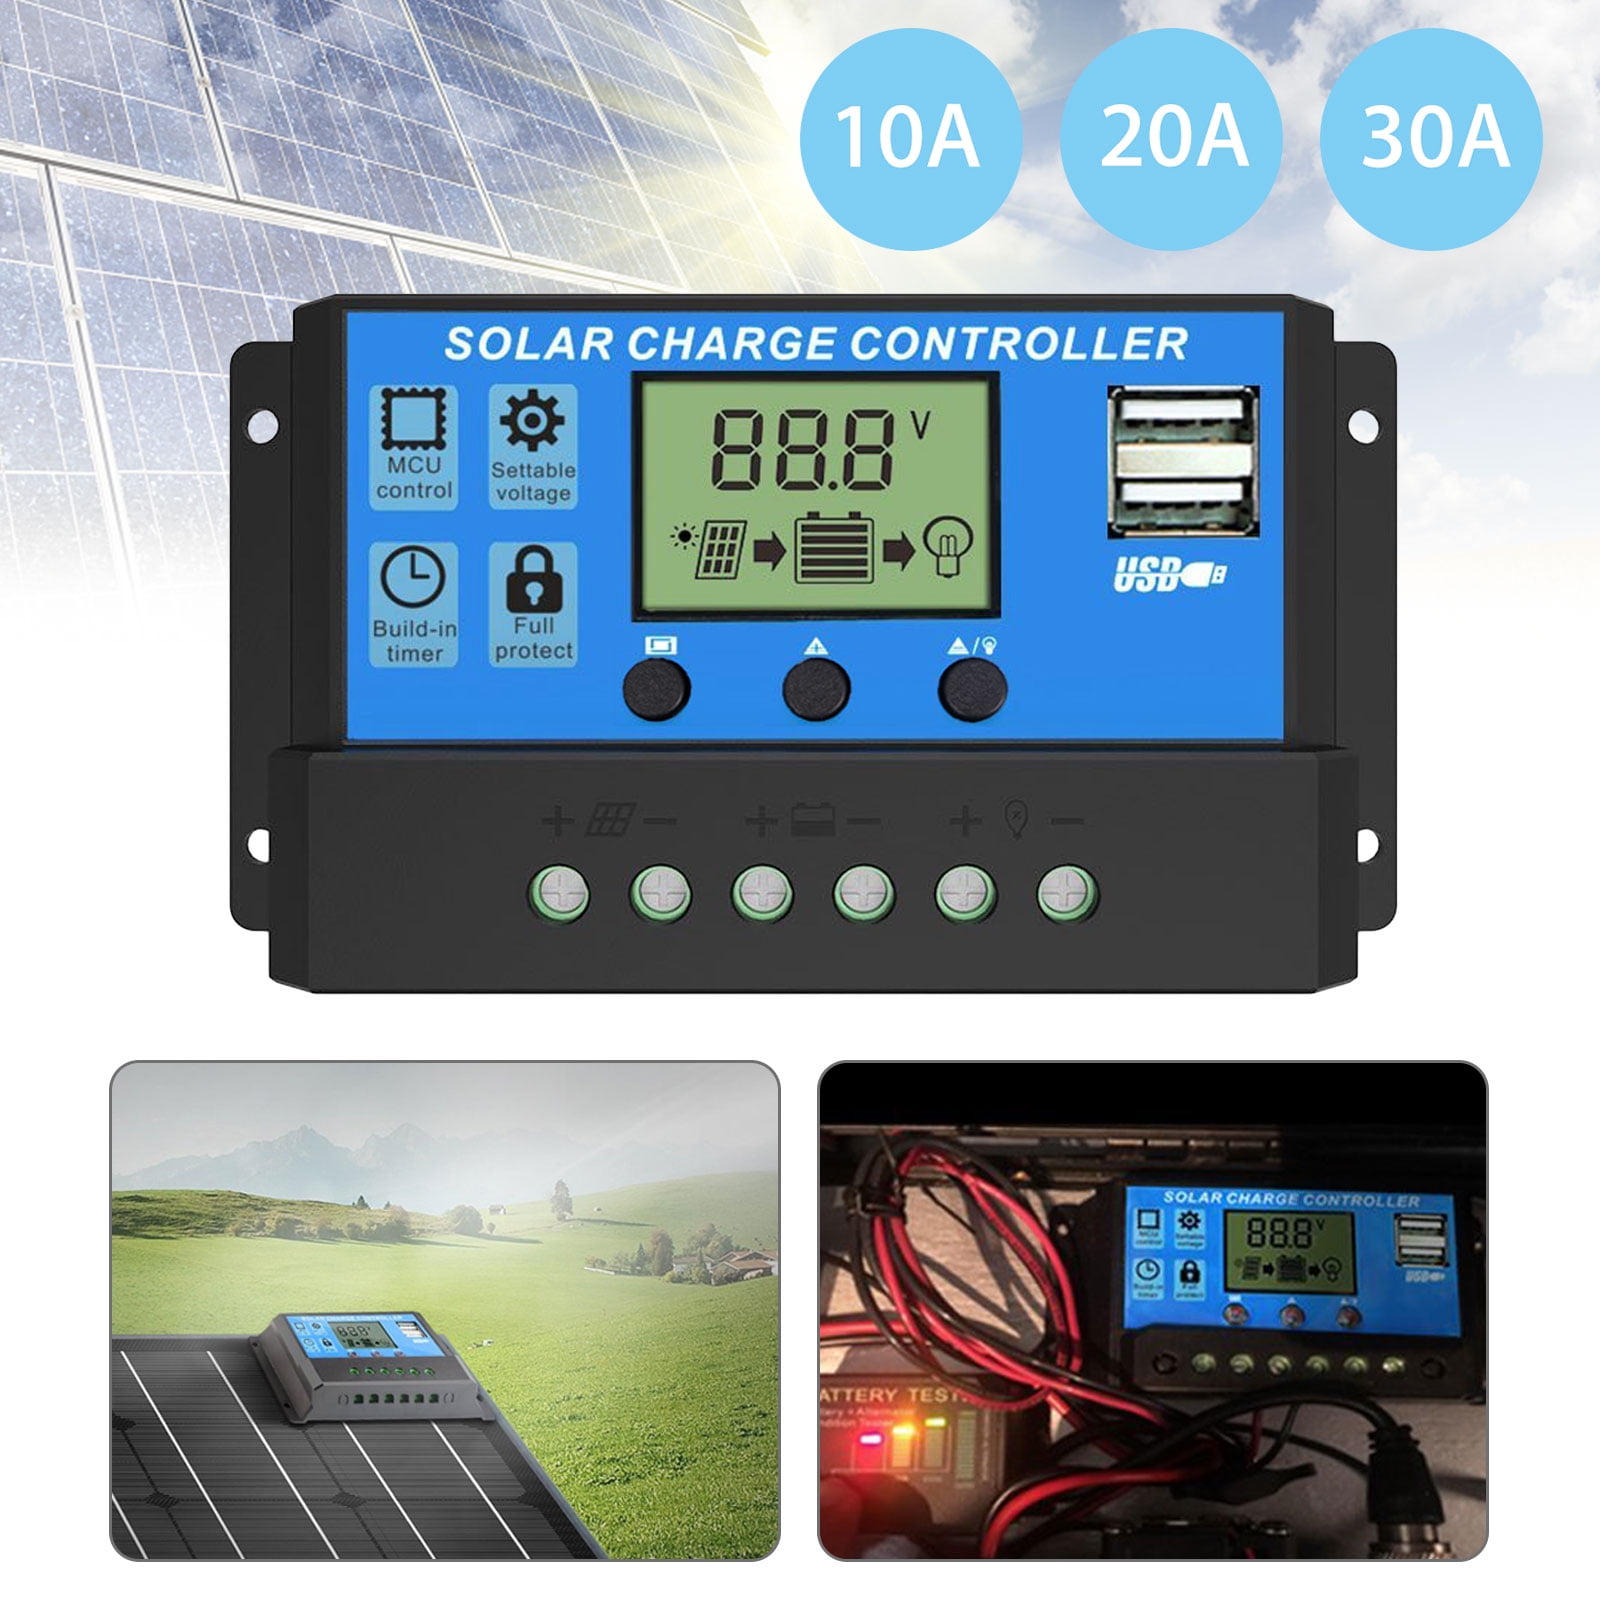 Monsing 20A Solar Charge Controller Solar Panel Battery Controller 12V/24V PWM Auto Paremeter Adjustable LCD Display Solar Panel Battery Regulator with Dual USB Load ON/Off Hours Timer Setting 